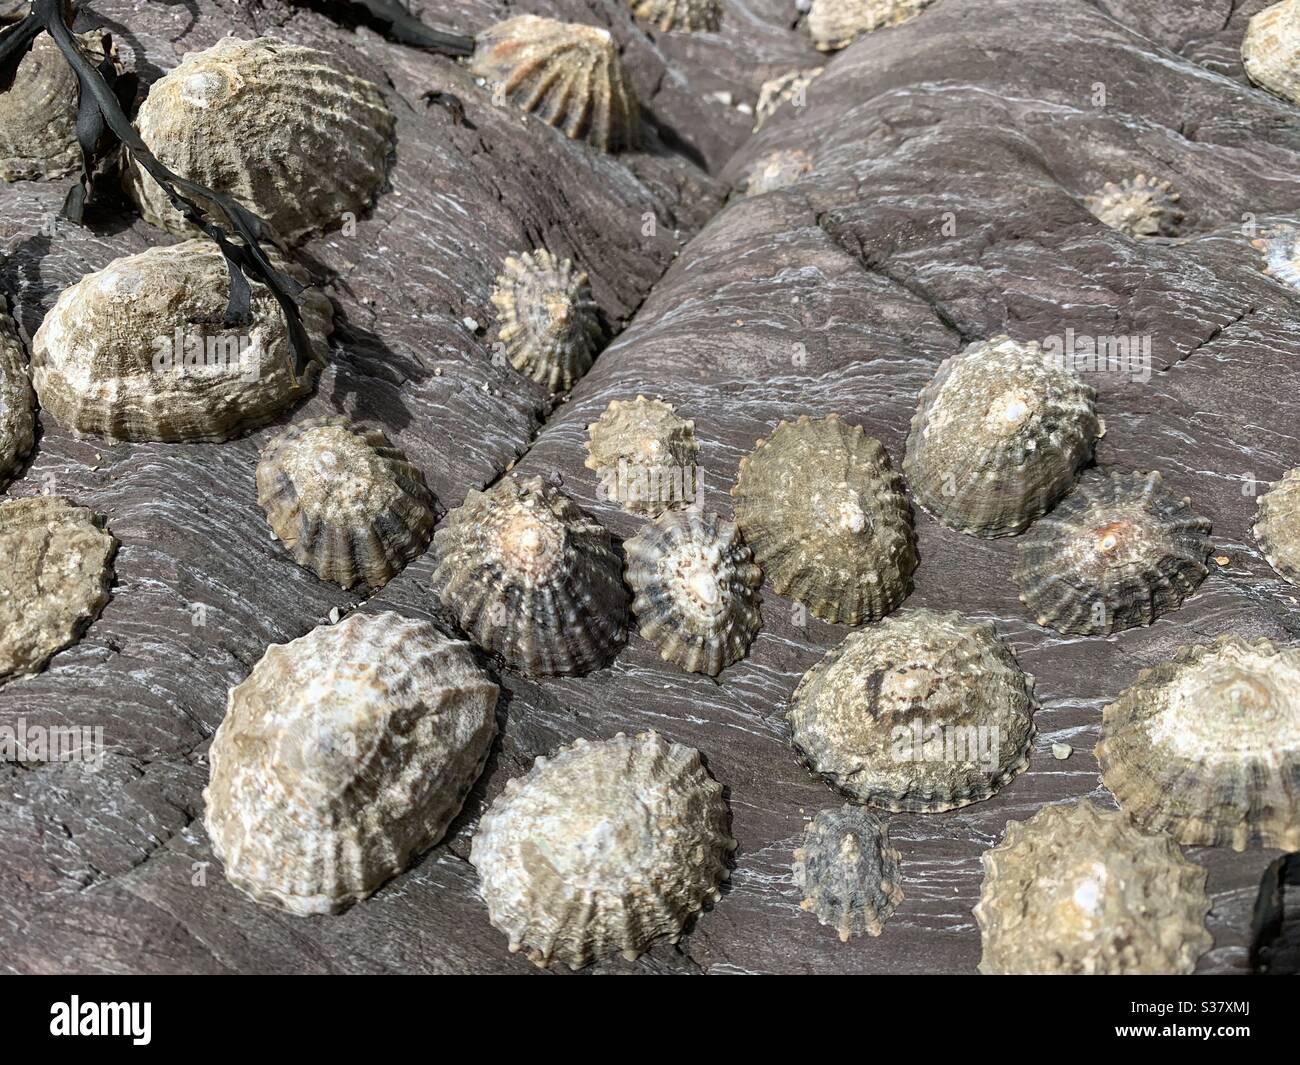 Limpets on a stone Stock Photo